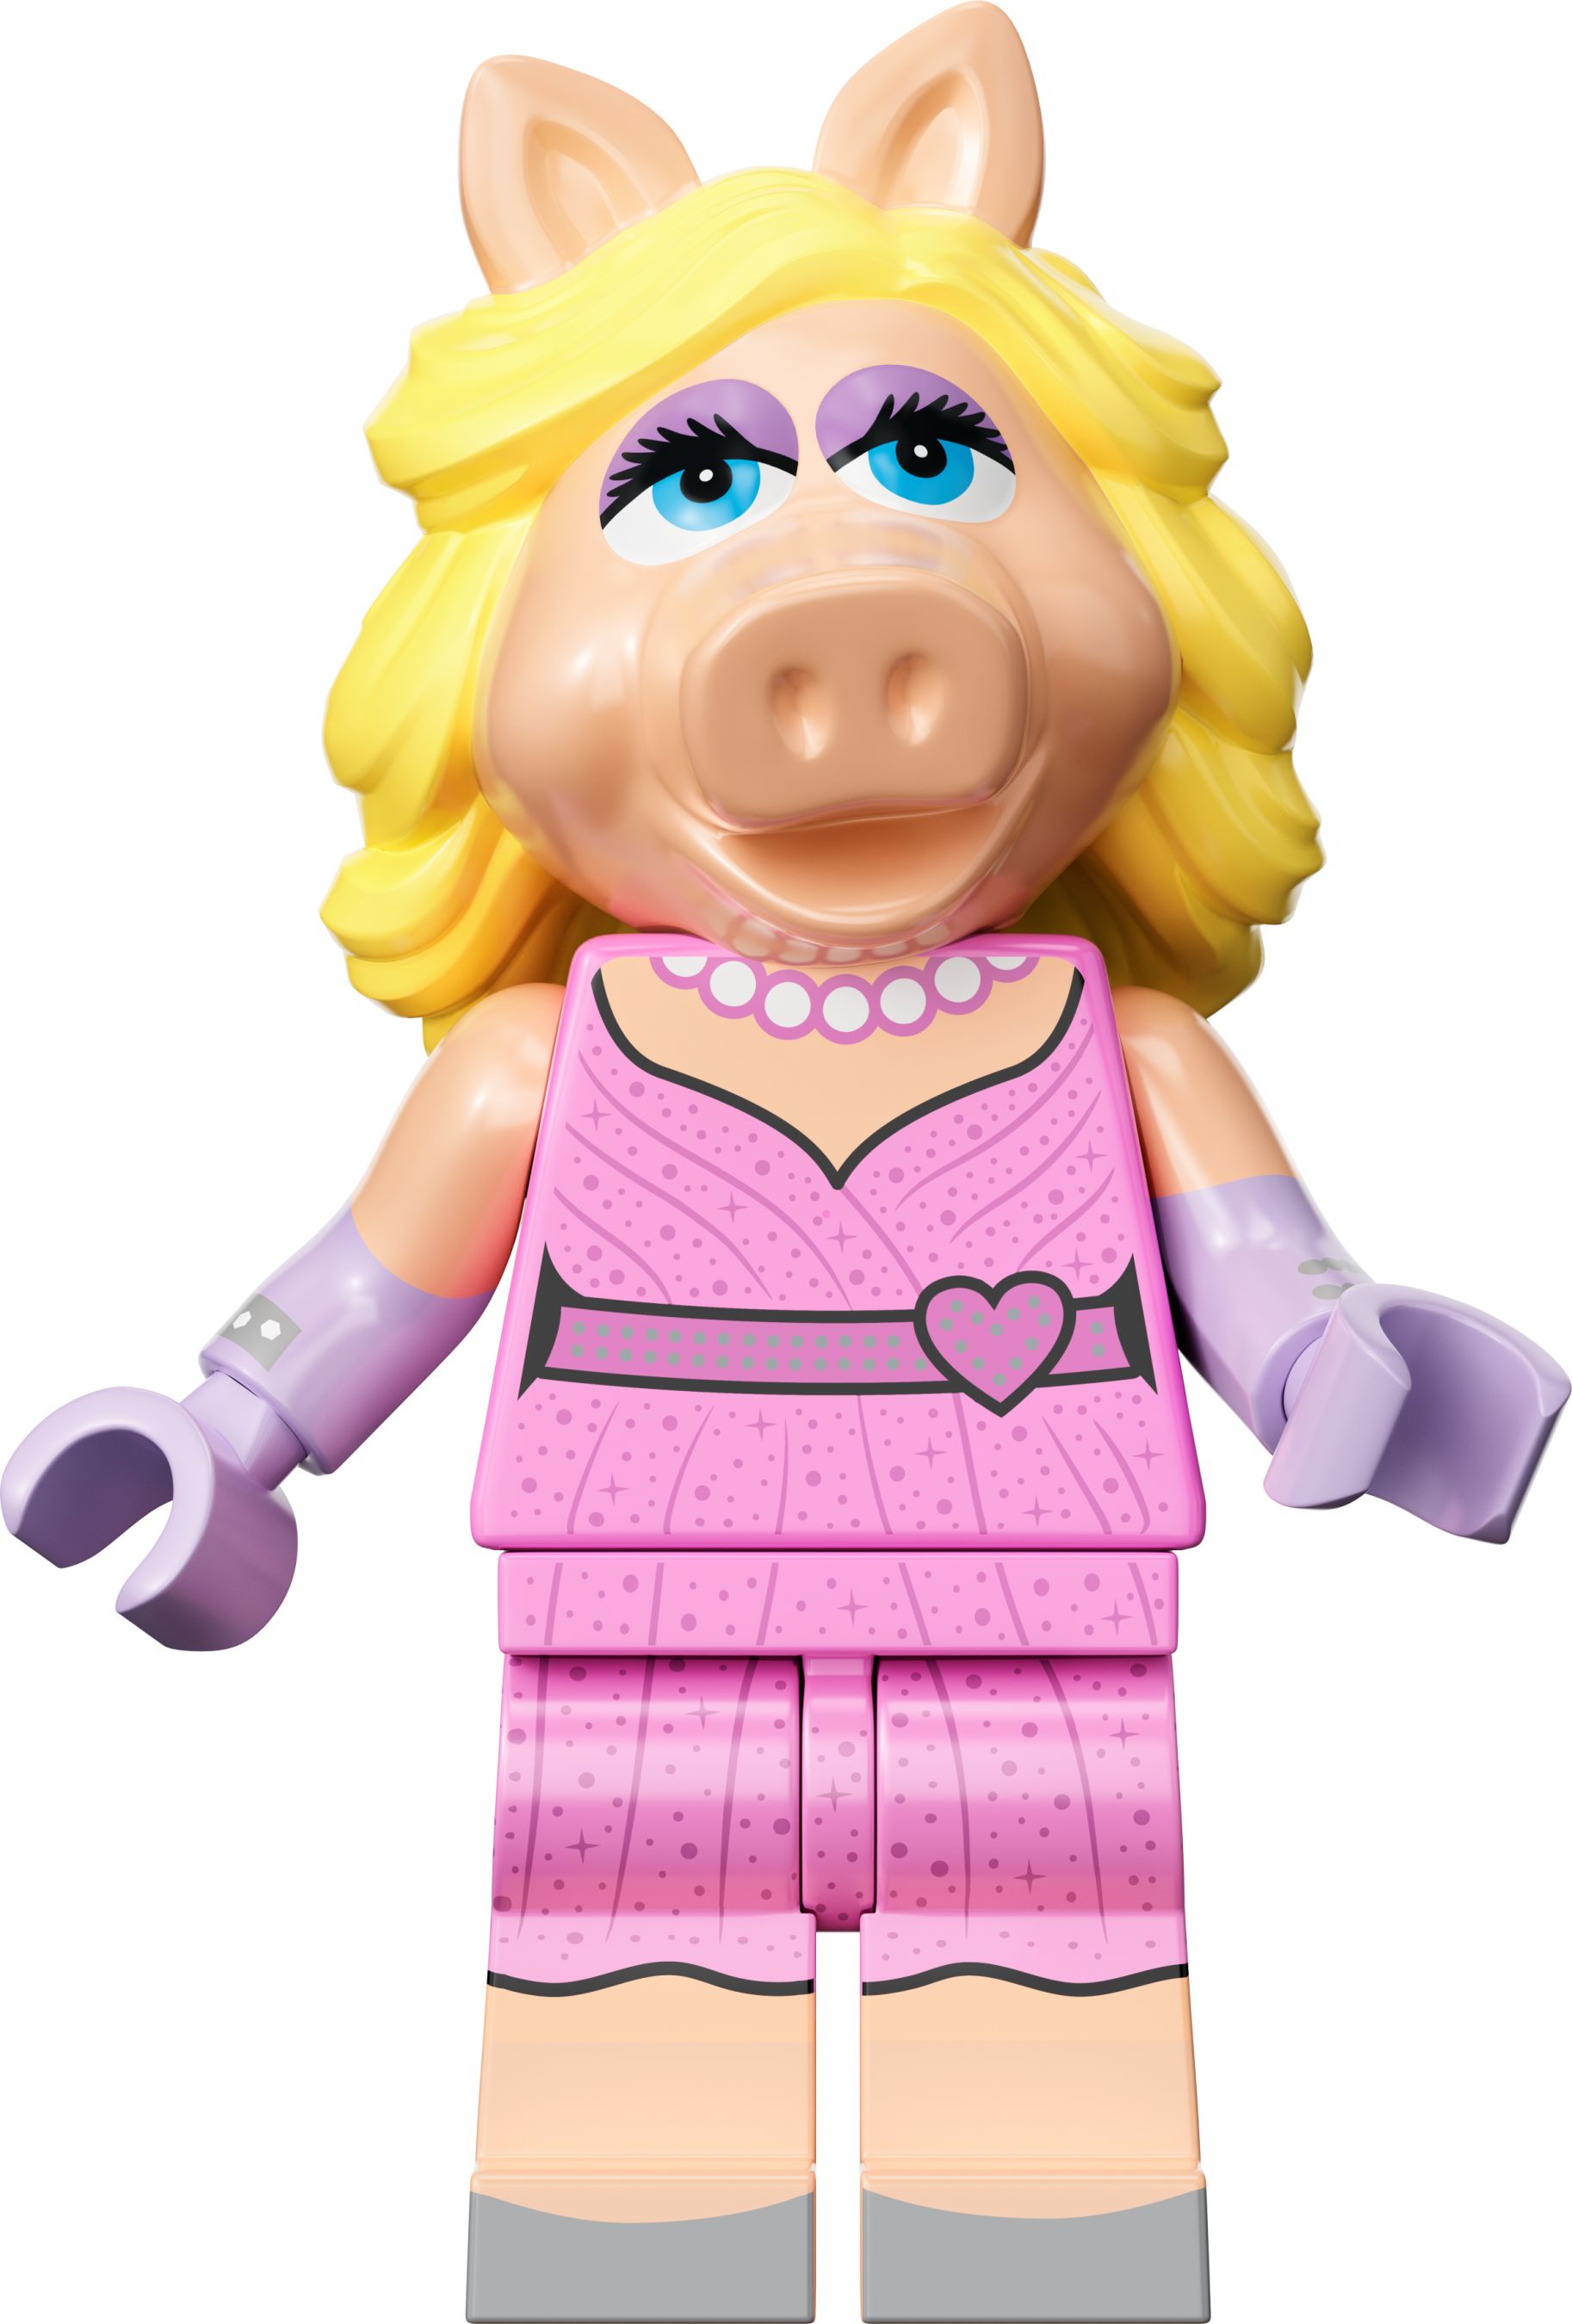 LEGO Collectable Minifigures 71033 LEGO® The Muppets Series LEGO_71033_alt8.jpg